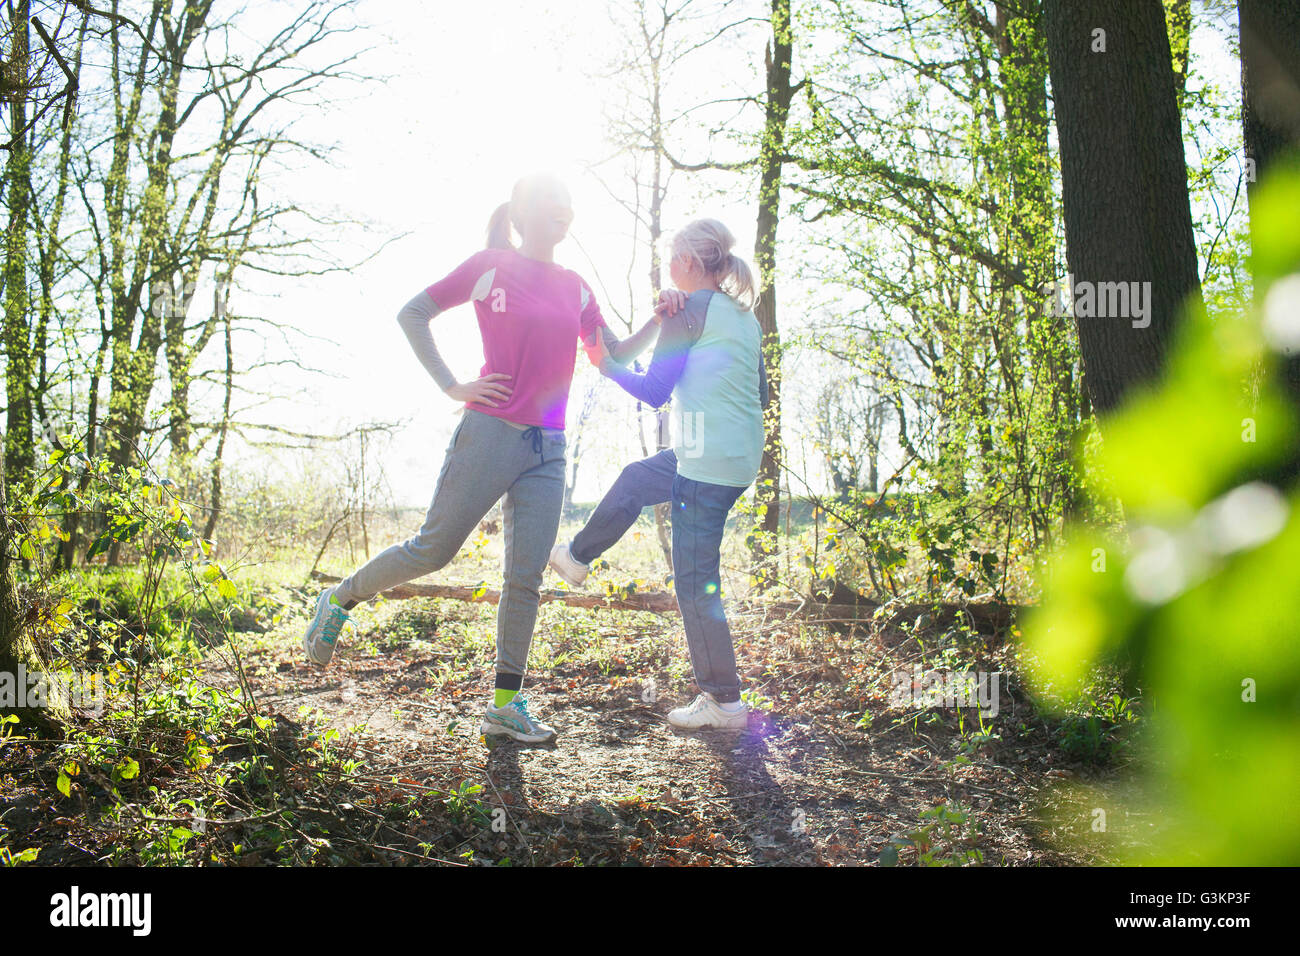 Women in forest face to face legs raised stretching Stock Photo